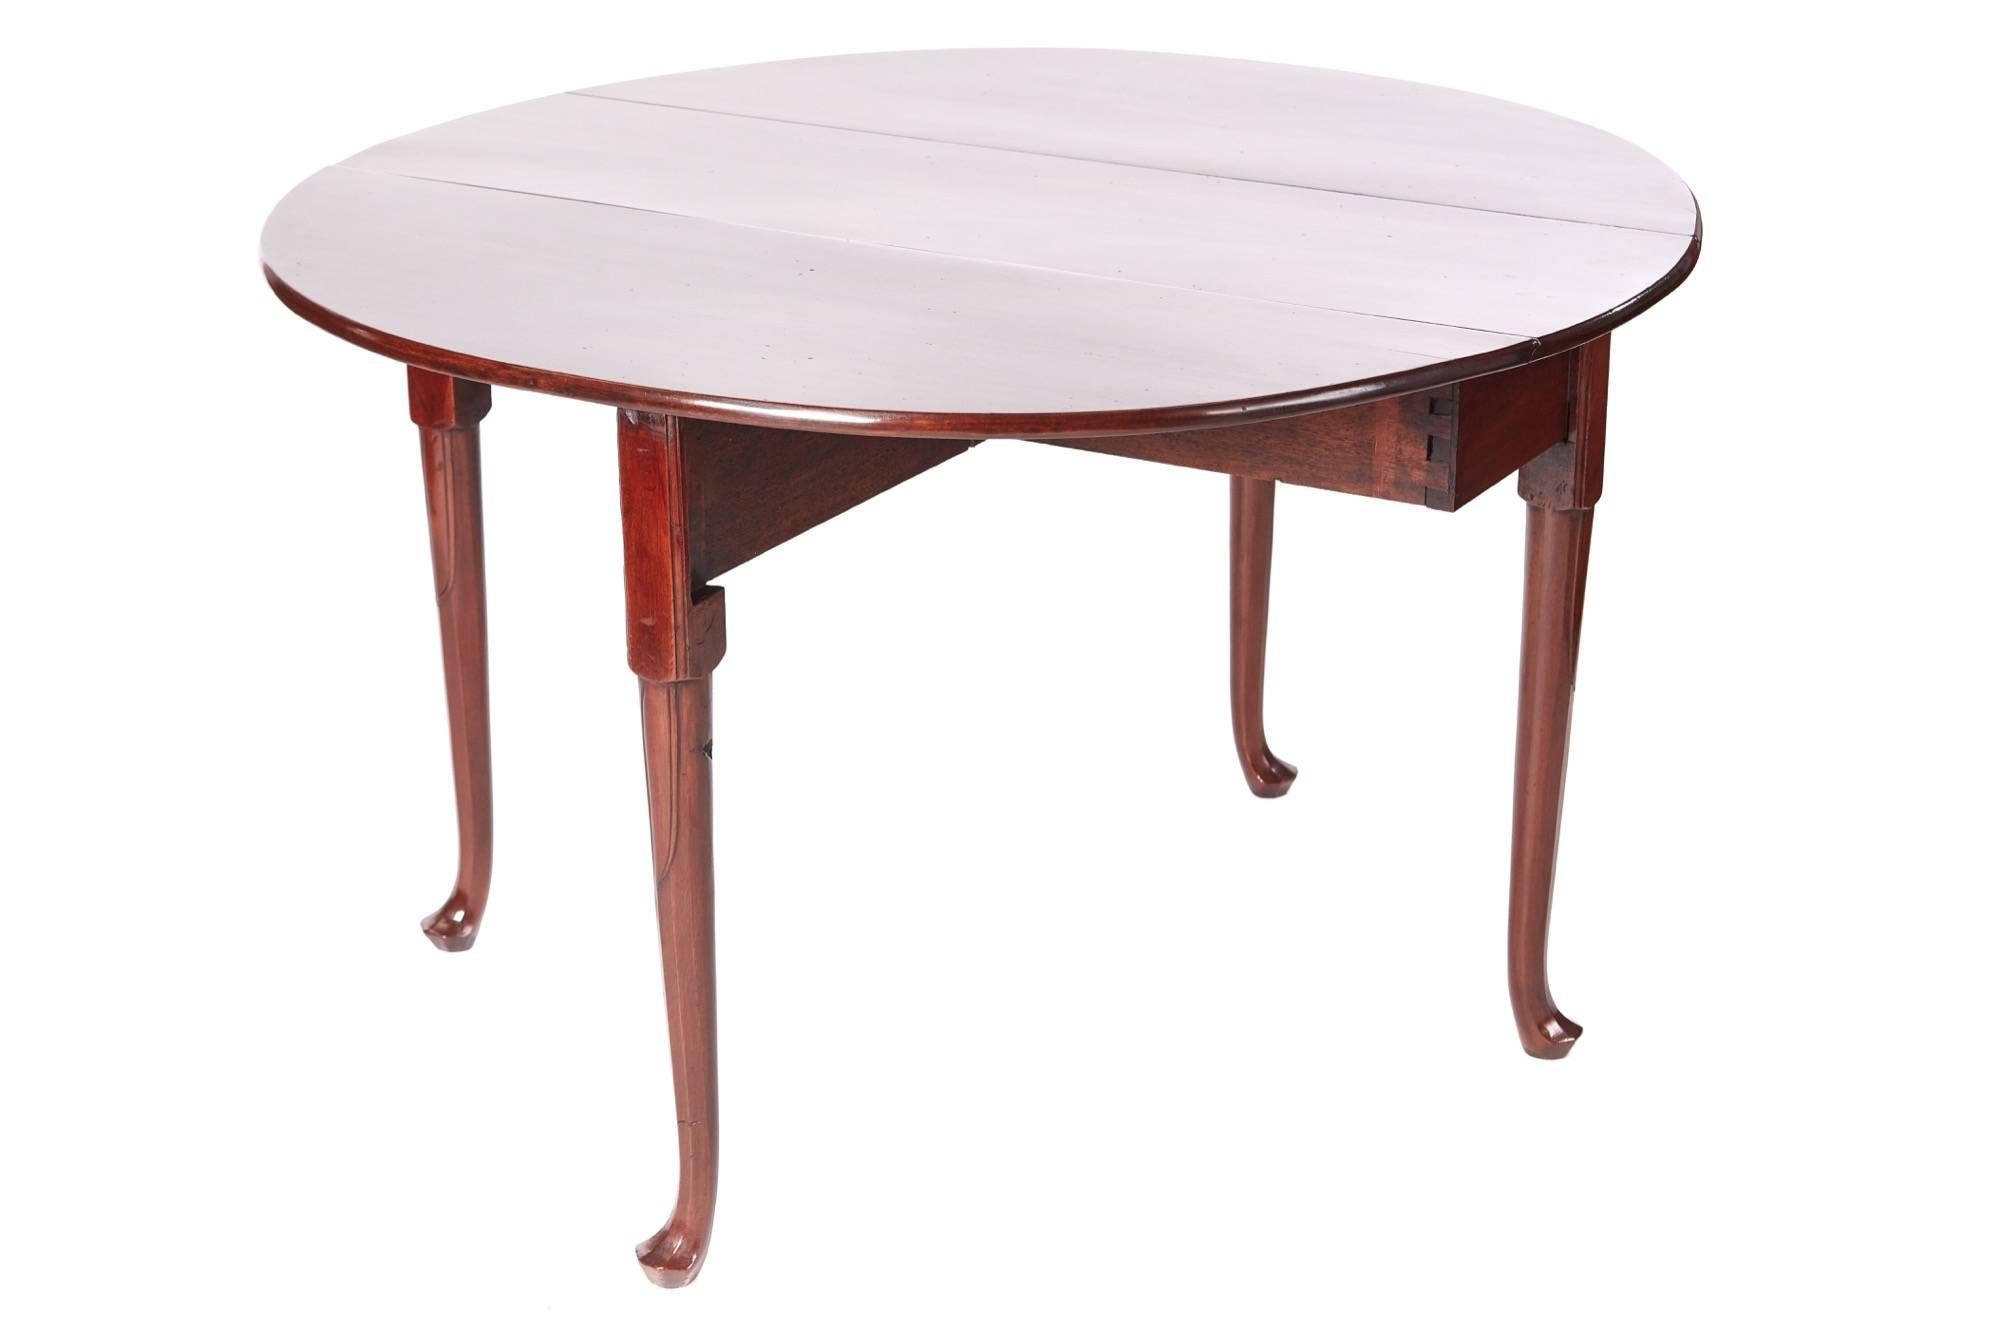 Quality george III mahogany dining table, having a fantastic solid mahogany top with two drop leaves, supported by four unusual turned legs with pad feet
Fantastic color and condition.